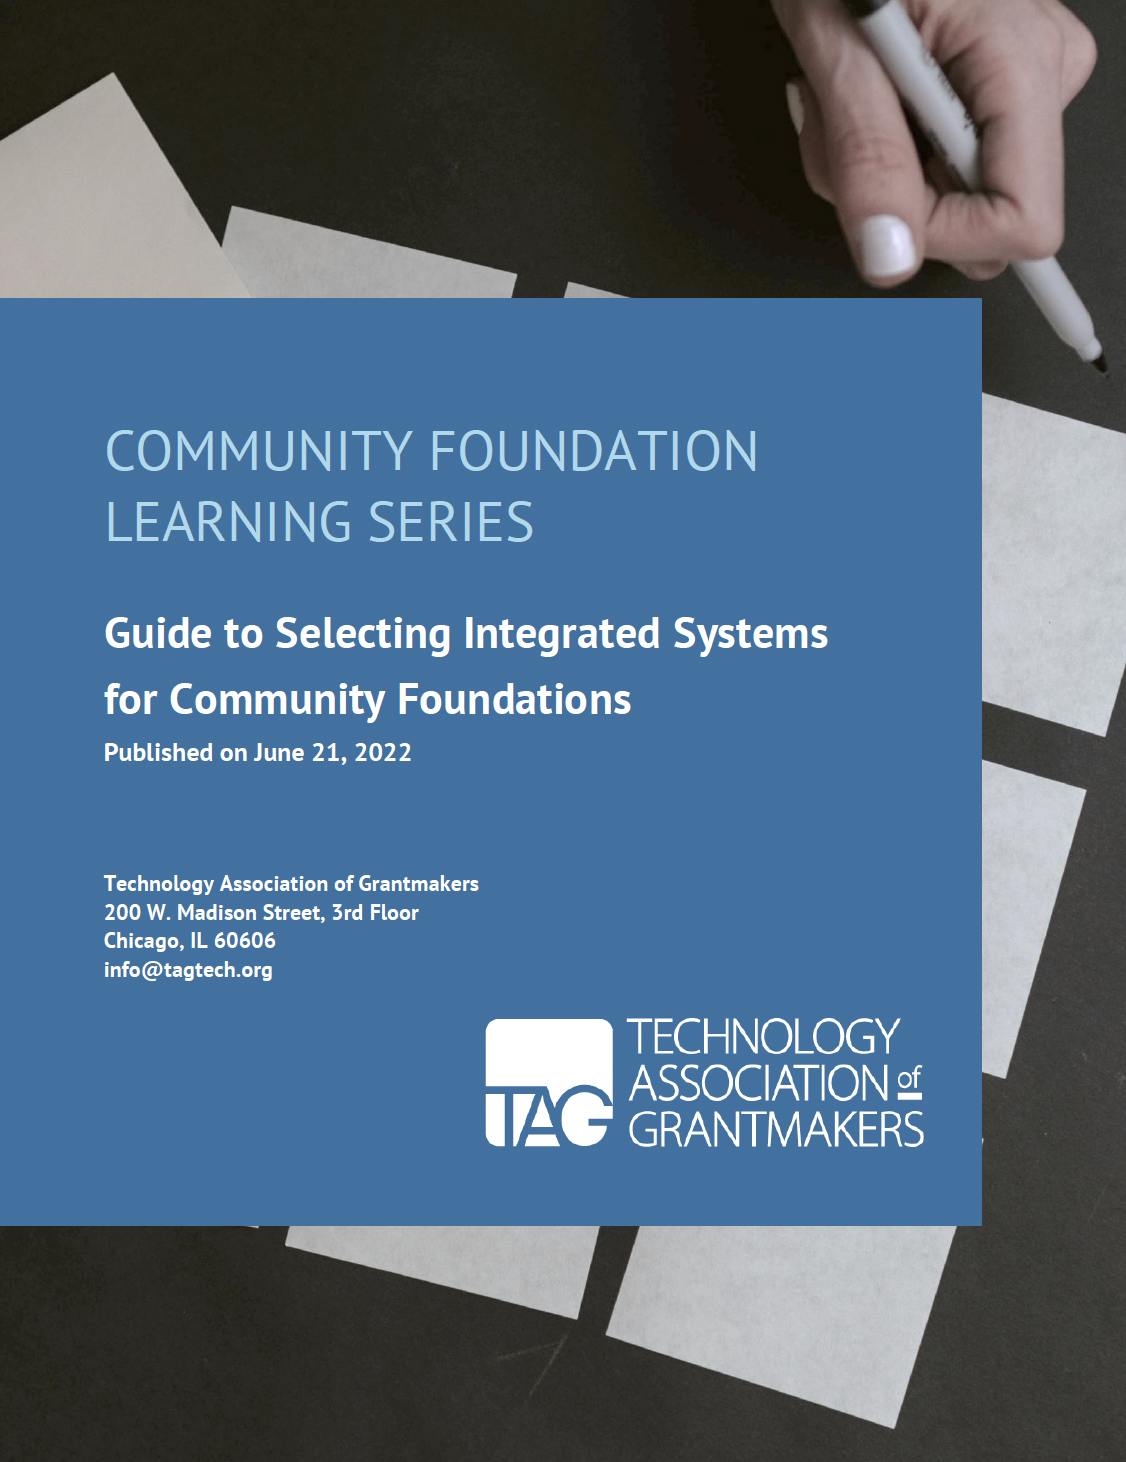 Guide to Selecting Integrated Systems for Community Foundations